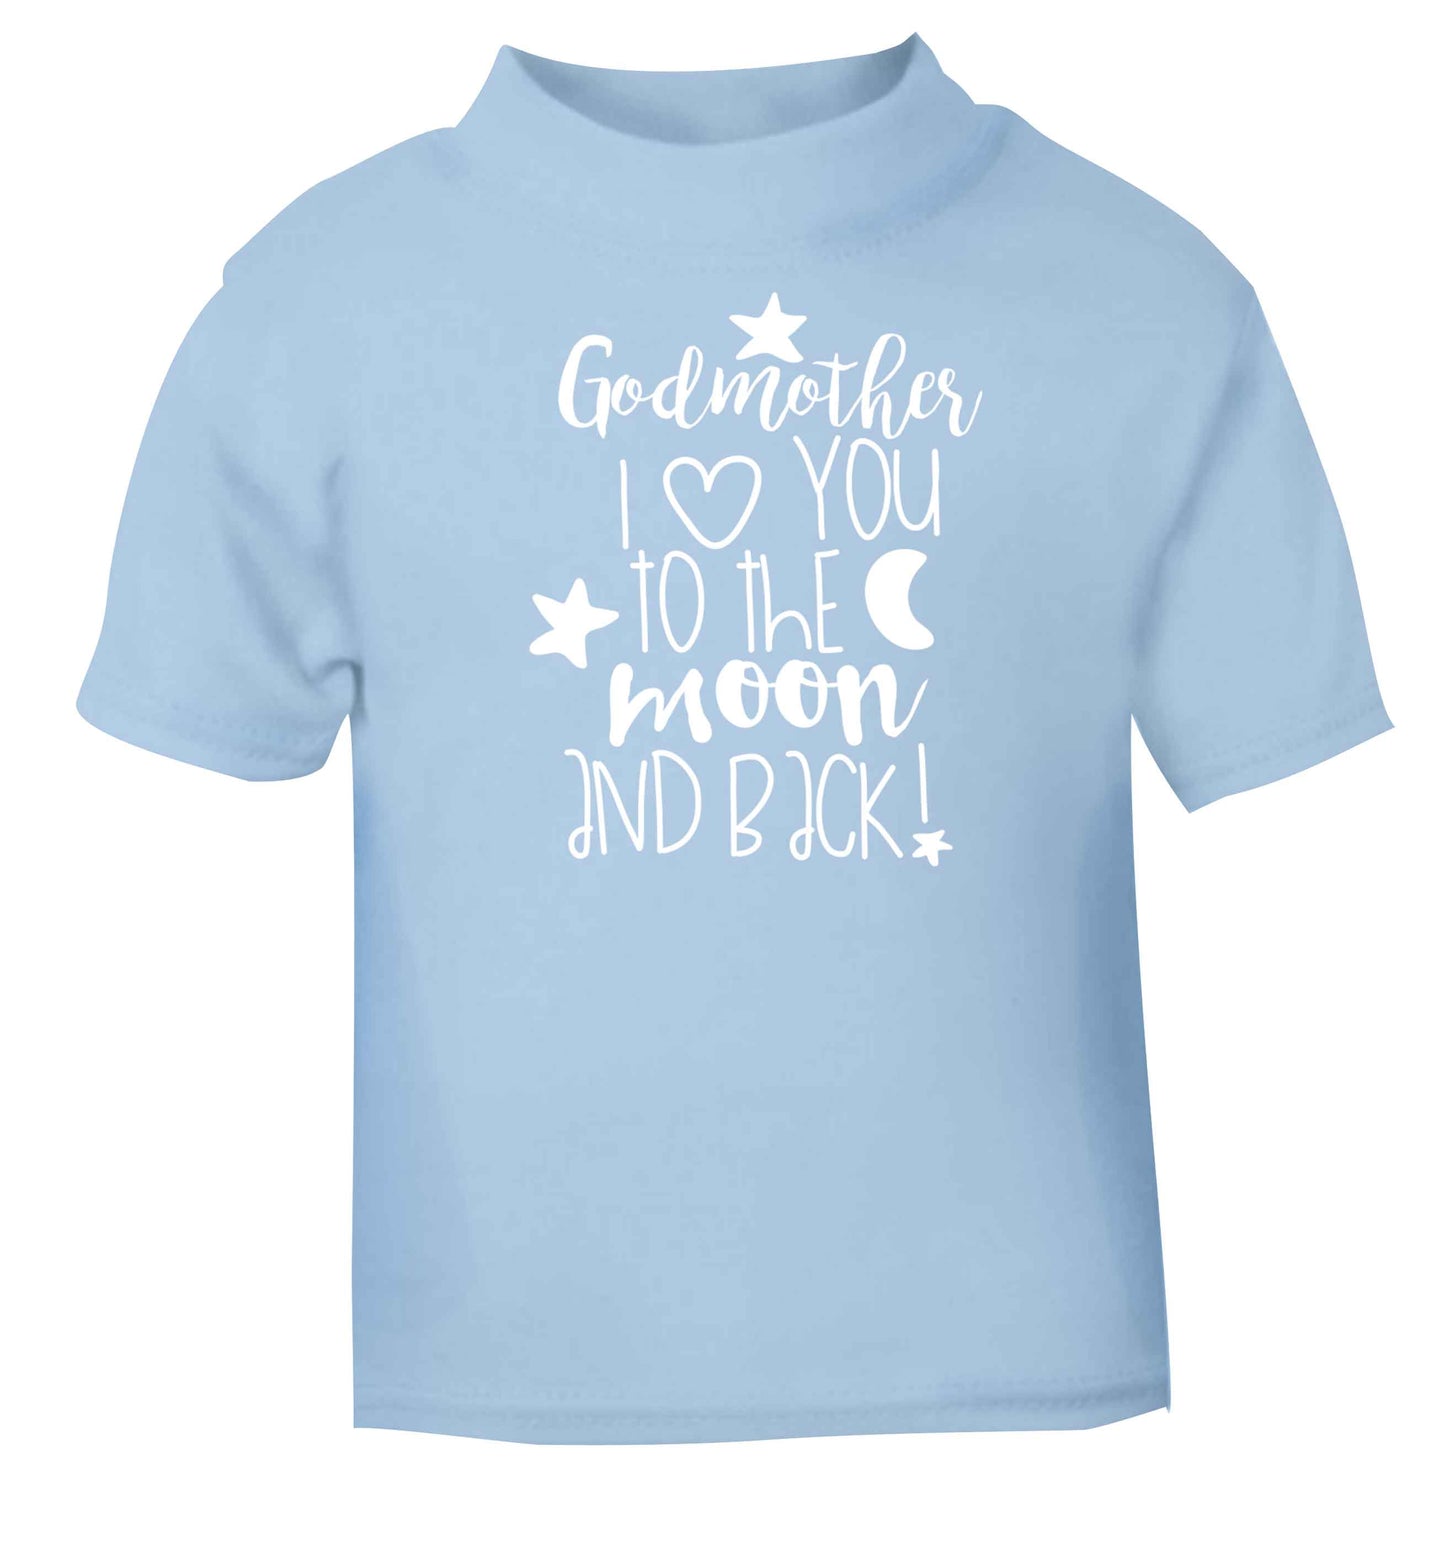 Godmother I love you to the moon and back light blue baby toddler Tshirt 2 Years